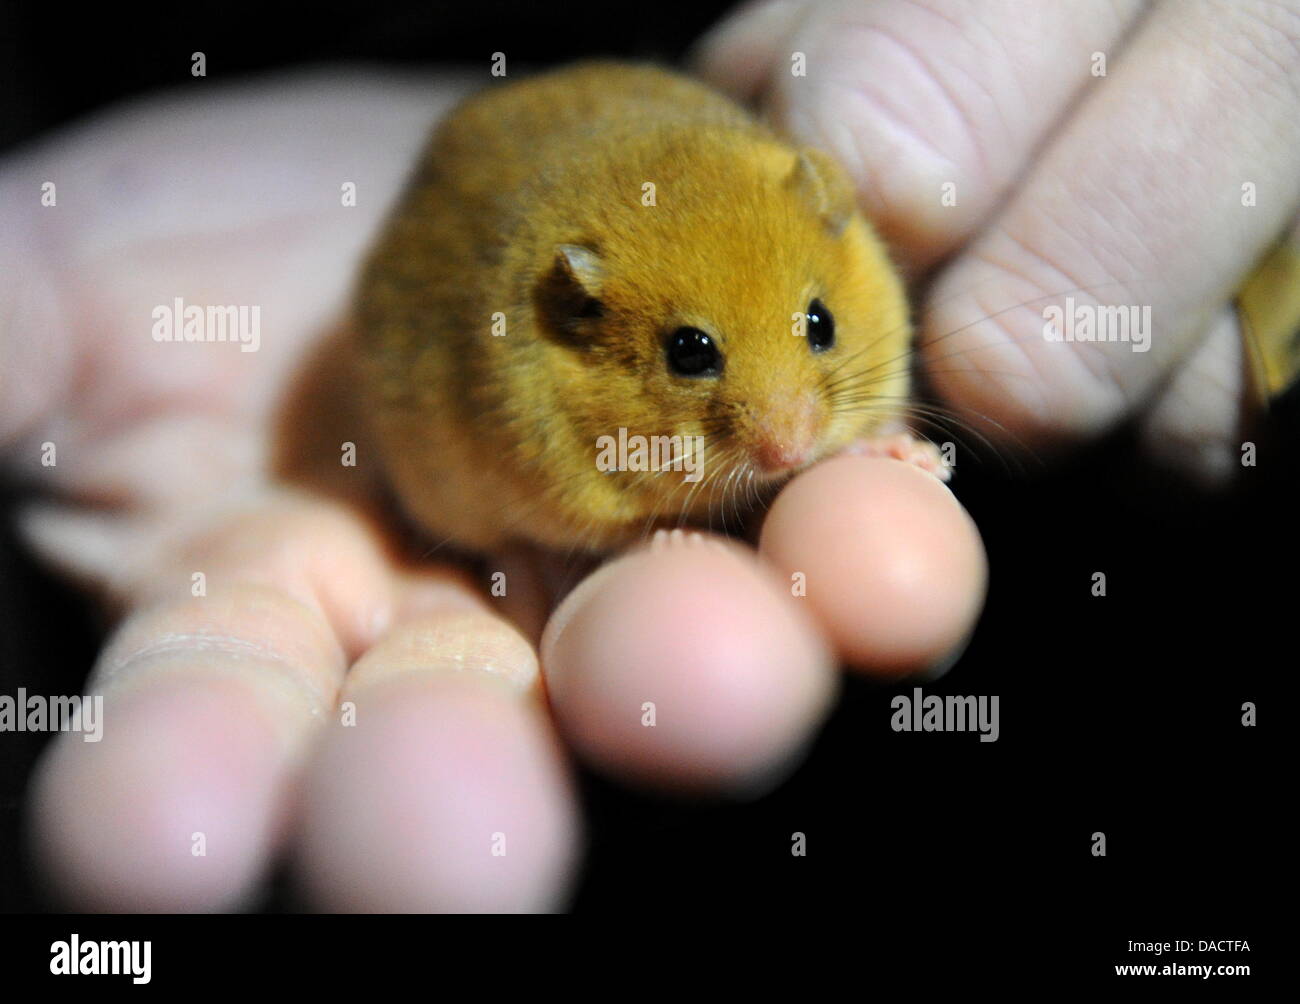 A small Hazel Dormouse (Muscardinus avellanarius) sits in the hand of a person at the wildlife park Eekholt, Germany, 15 December 2011. A breeding station shall be erected for the endagered animals at the wildlife park in Eekholt. The rescue program is part of the German-Danish project 'BioGrenzKorr' of the park and the foundation Naturschutz and is funded by the EU. Photo: Carsten Stock Photo